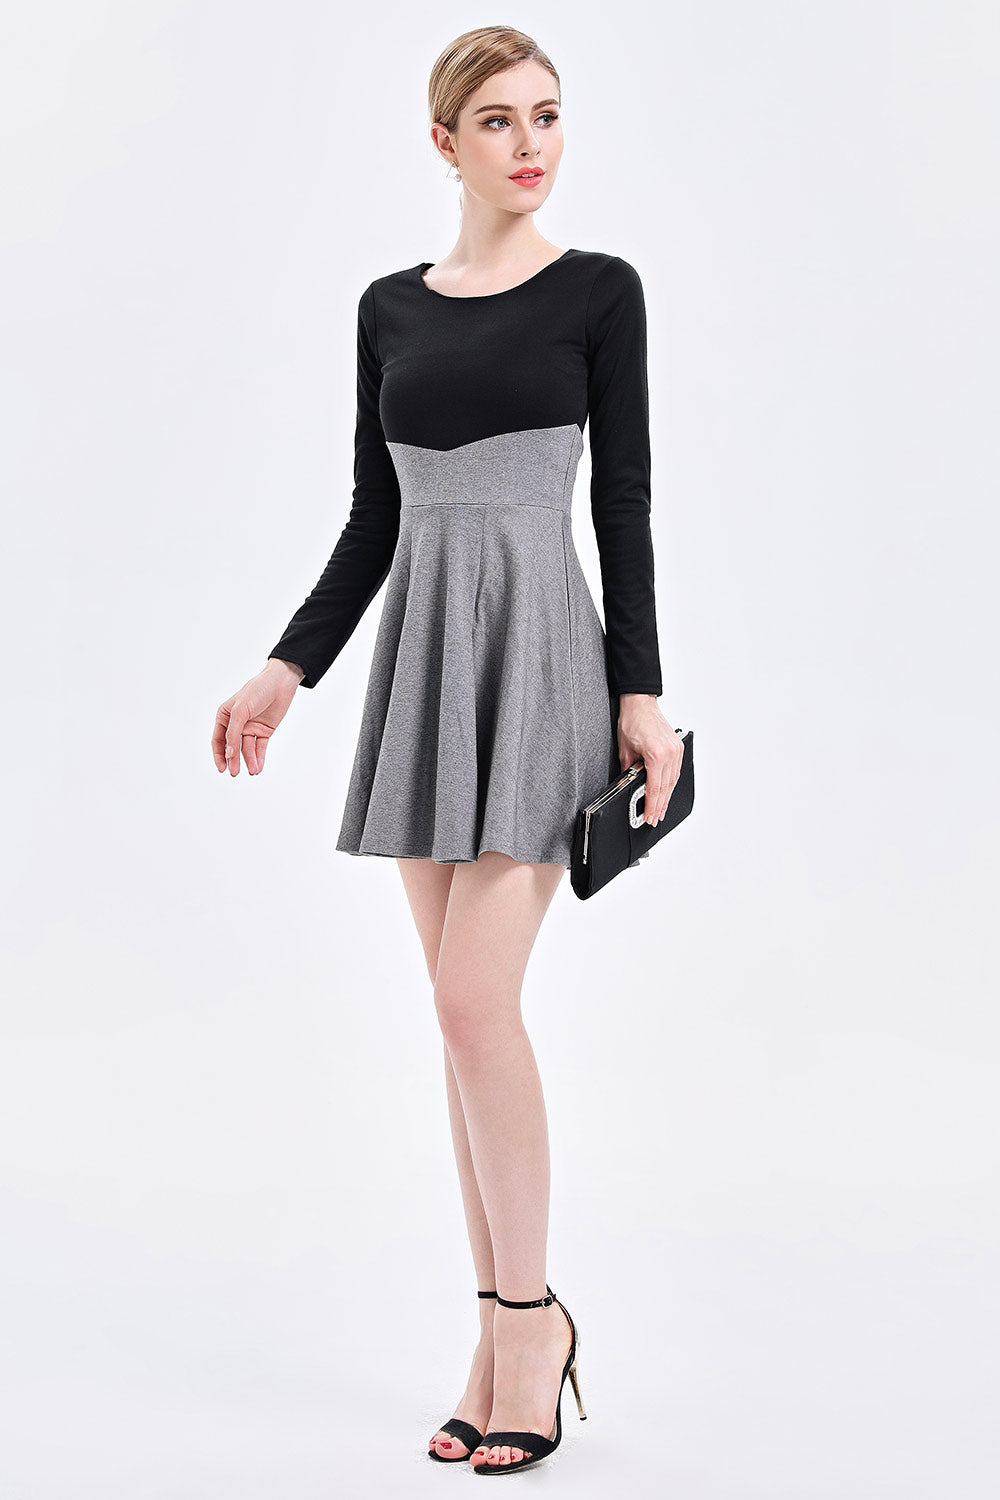 Women's contrast color stitching slim long-sleeved dress Sai Feel